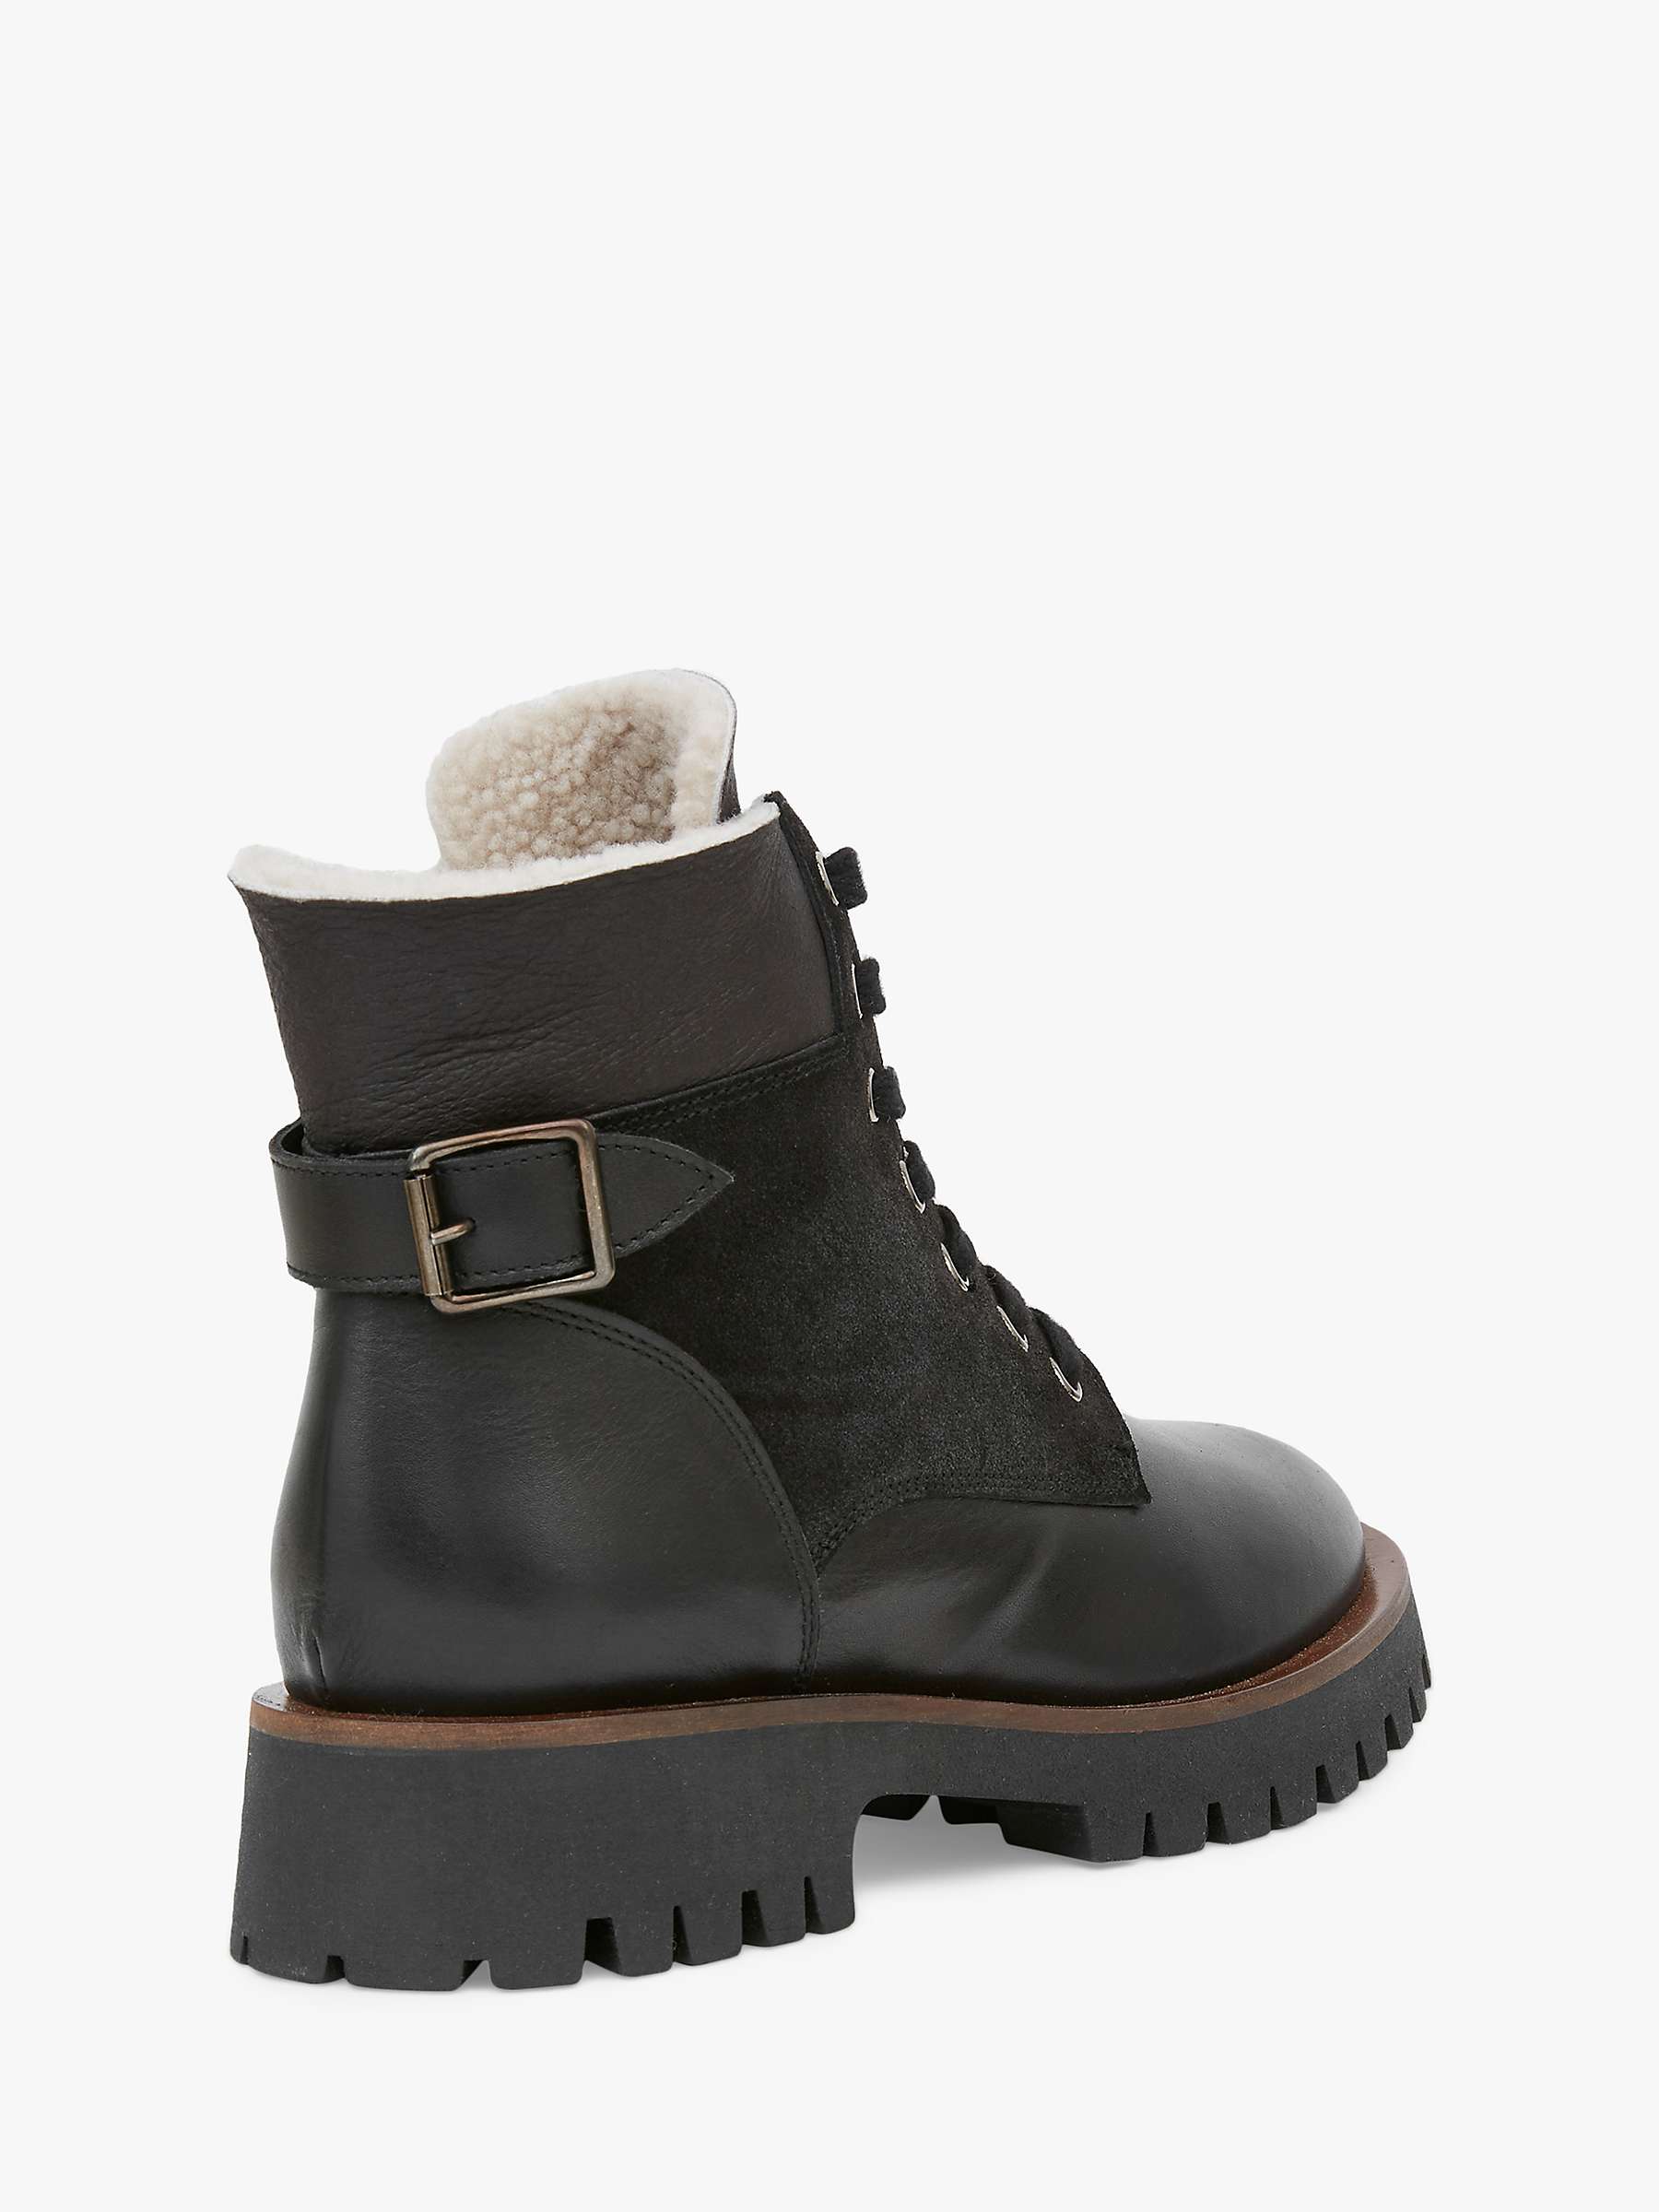 Buy Celtic & Co. Leather And Sheepskin Wool Lace Up Boots Online at johnlewis.com